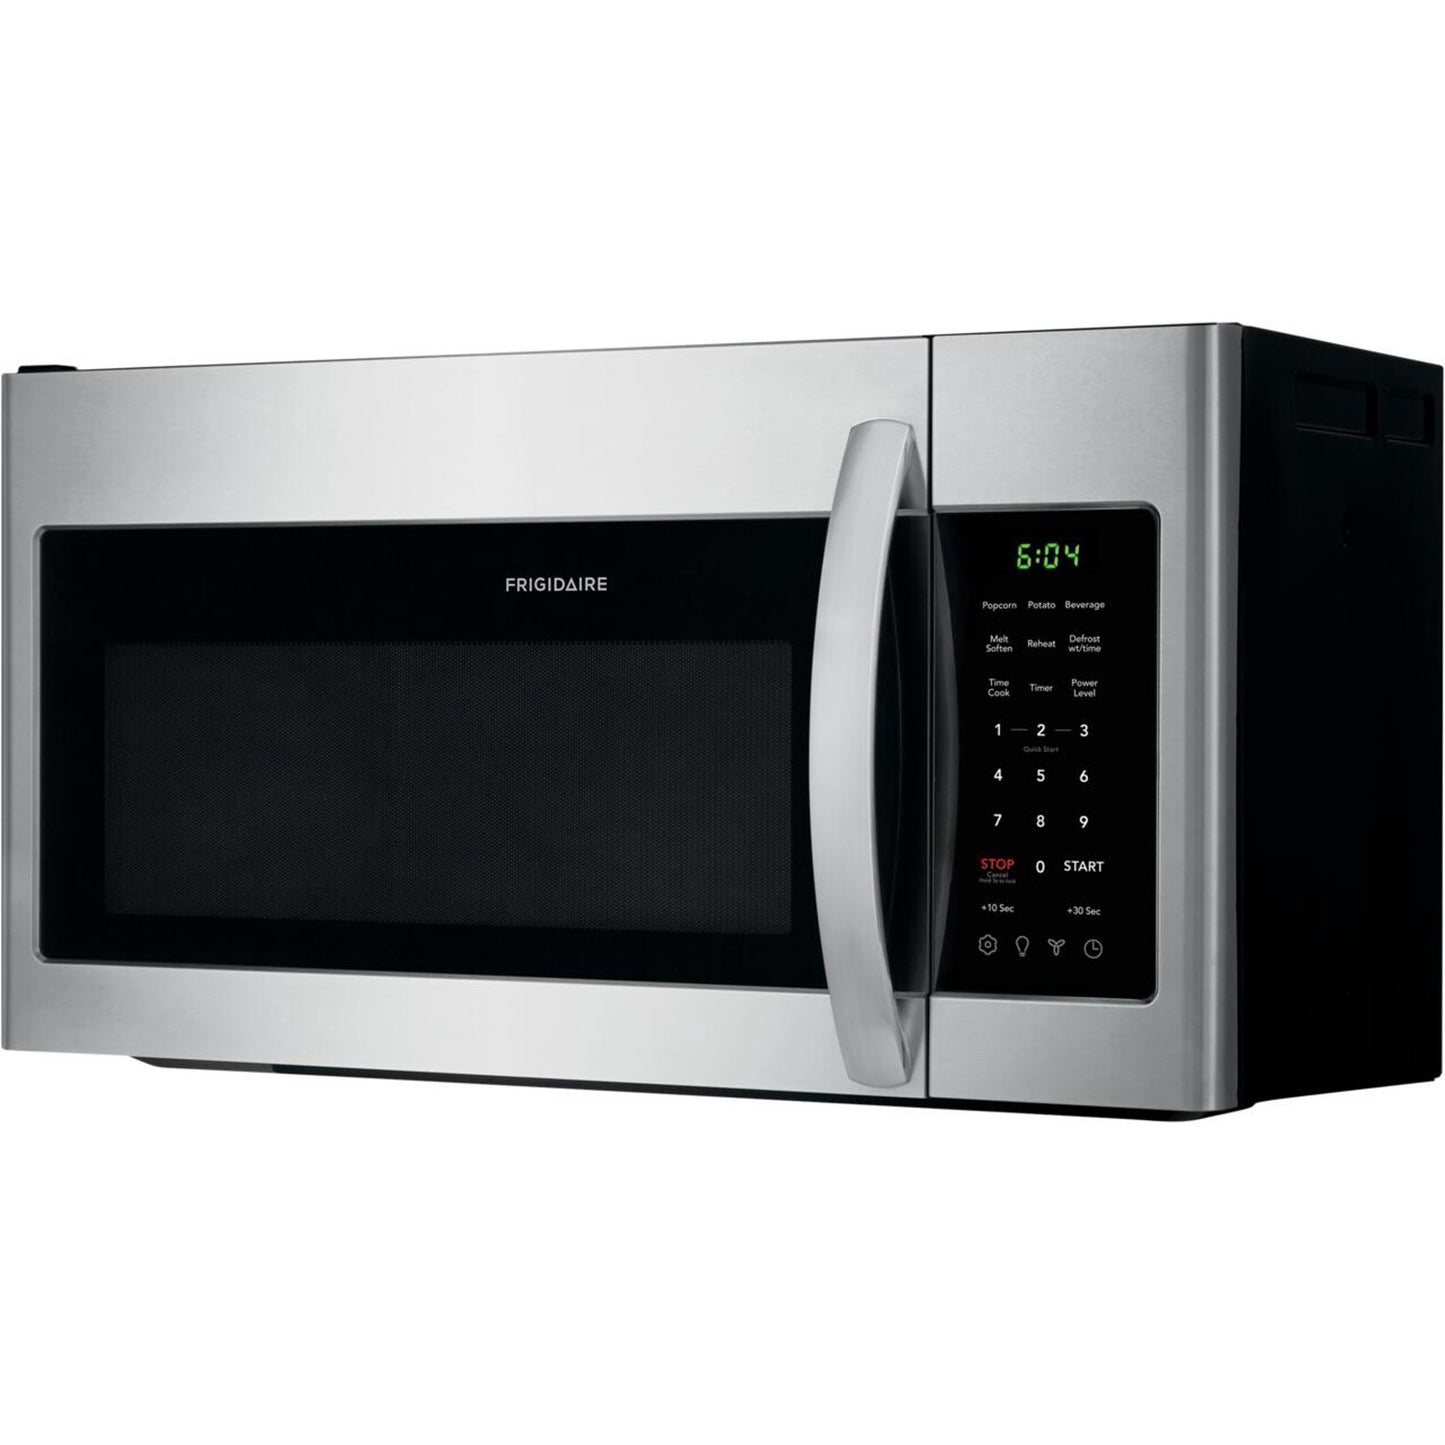 30 Inch Over the Range Microwave Oven with 1.8 cu. ft. - Frigidaire - FFMV1846VS